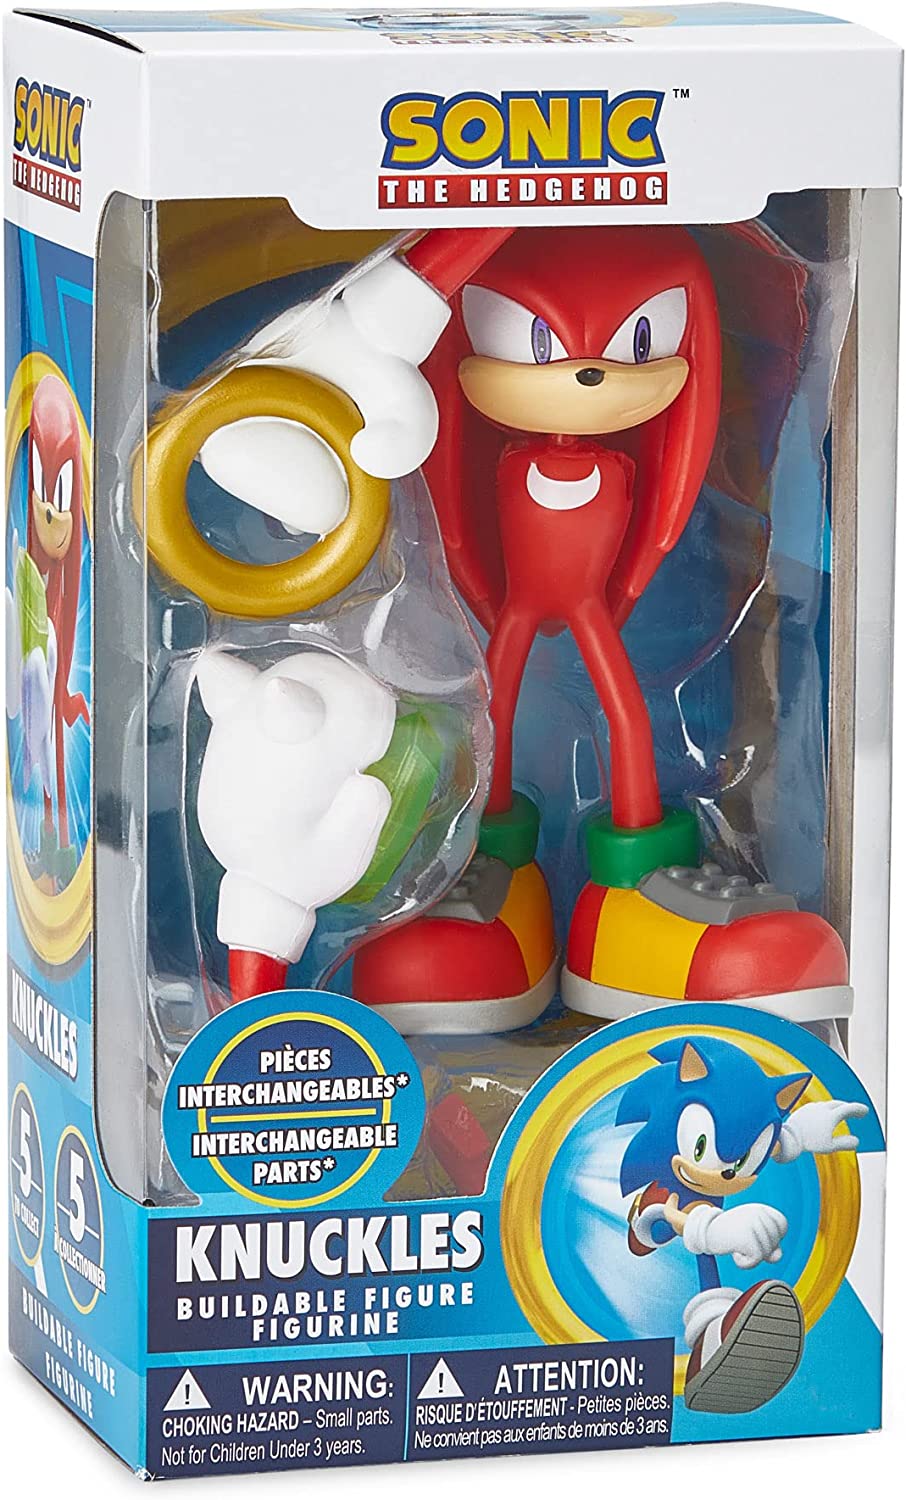 Sonic the Hedgehog 4" Buildable Figure: Knuckles